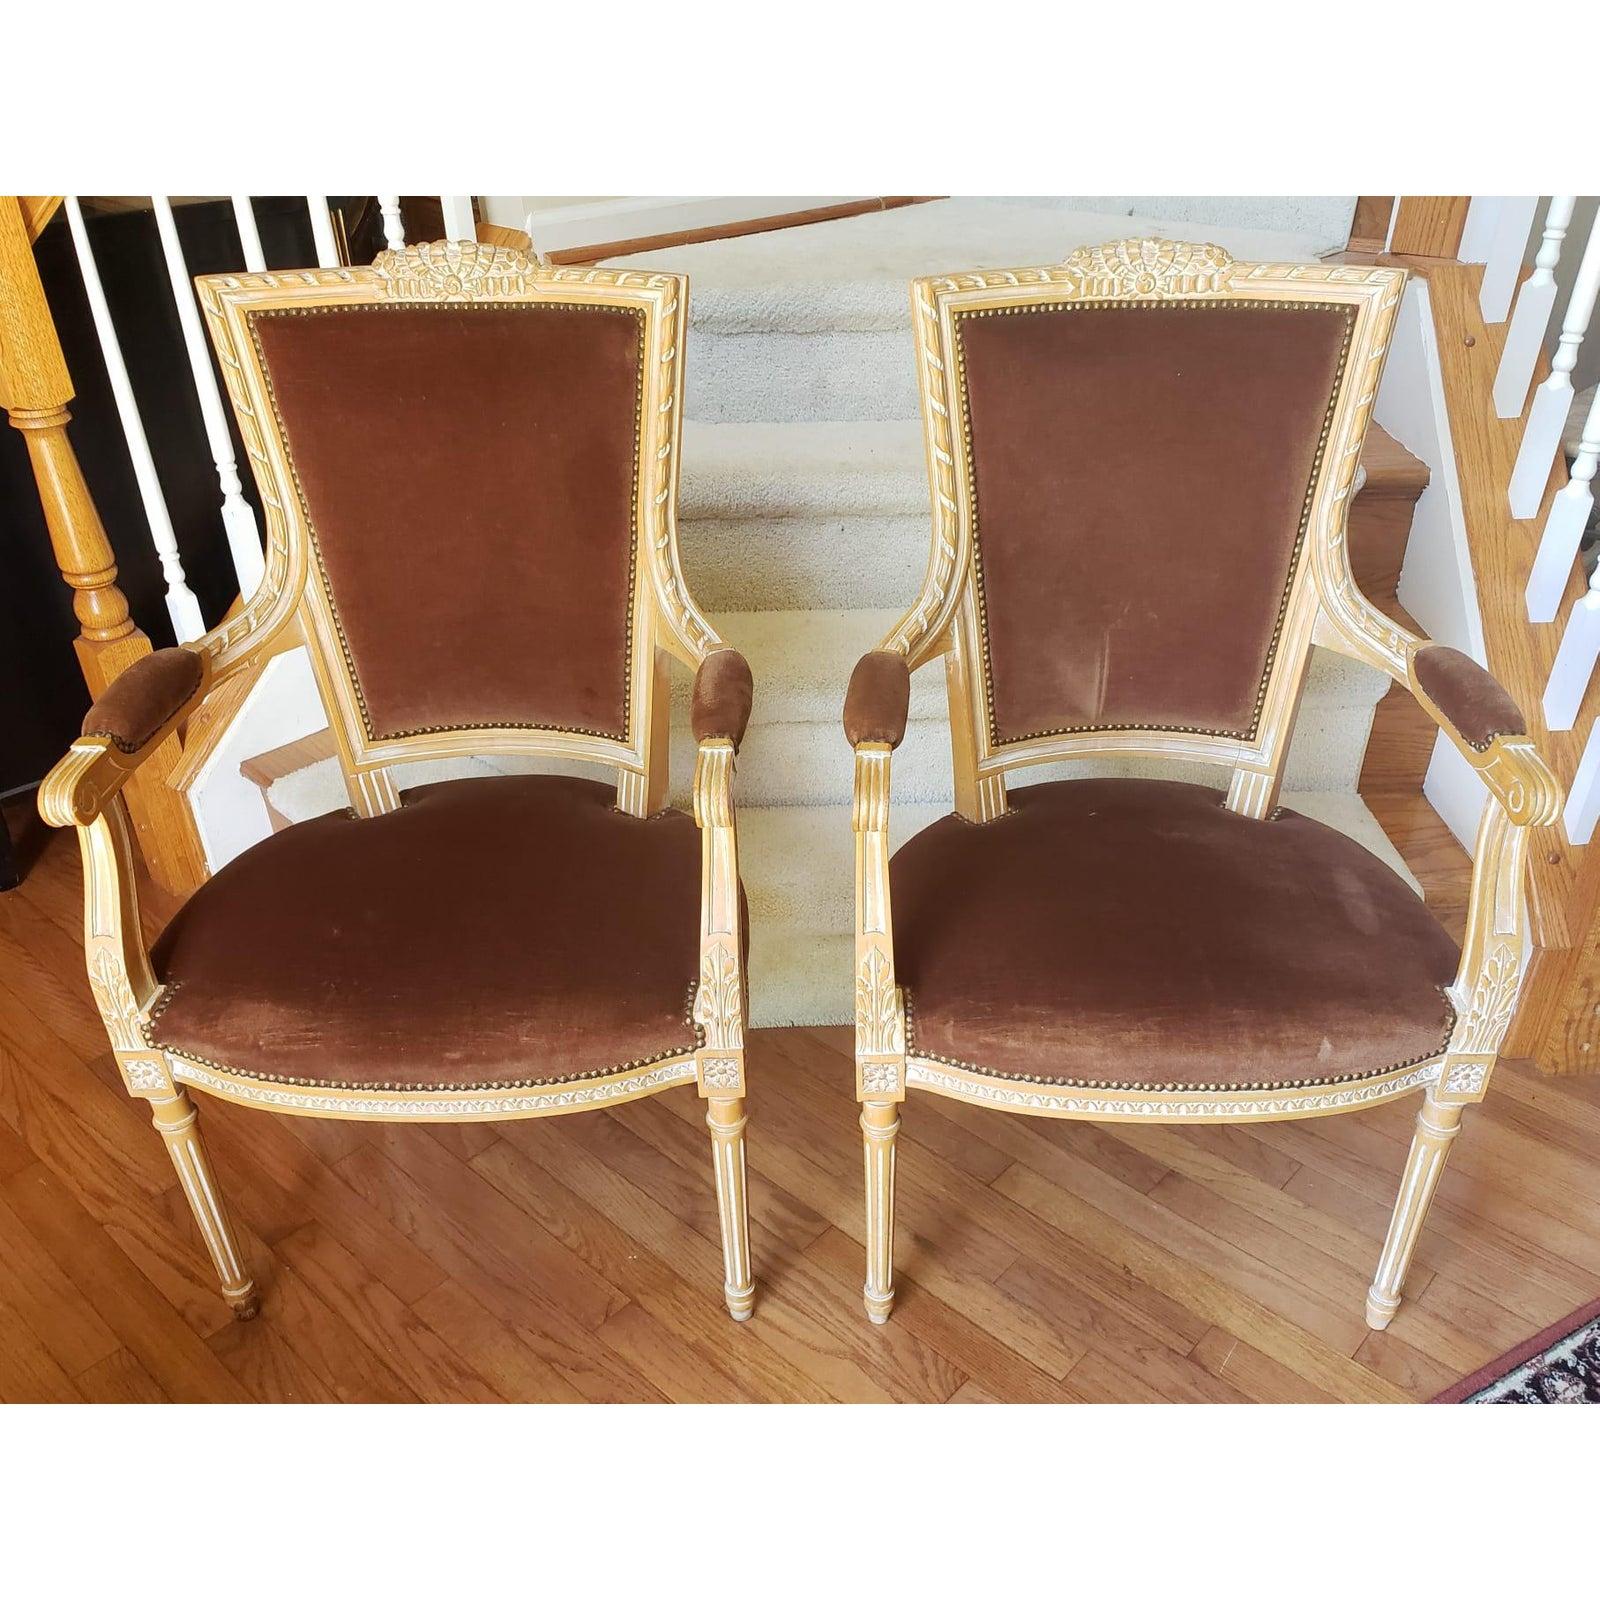 Fabulous vintage pair of Gustavian style Swedish Empire armChairs with true gustavian carvings. Dark Brown Velvet Upholstery is in excellent condition. Chairs measure 24